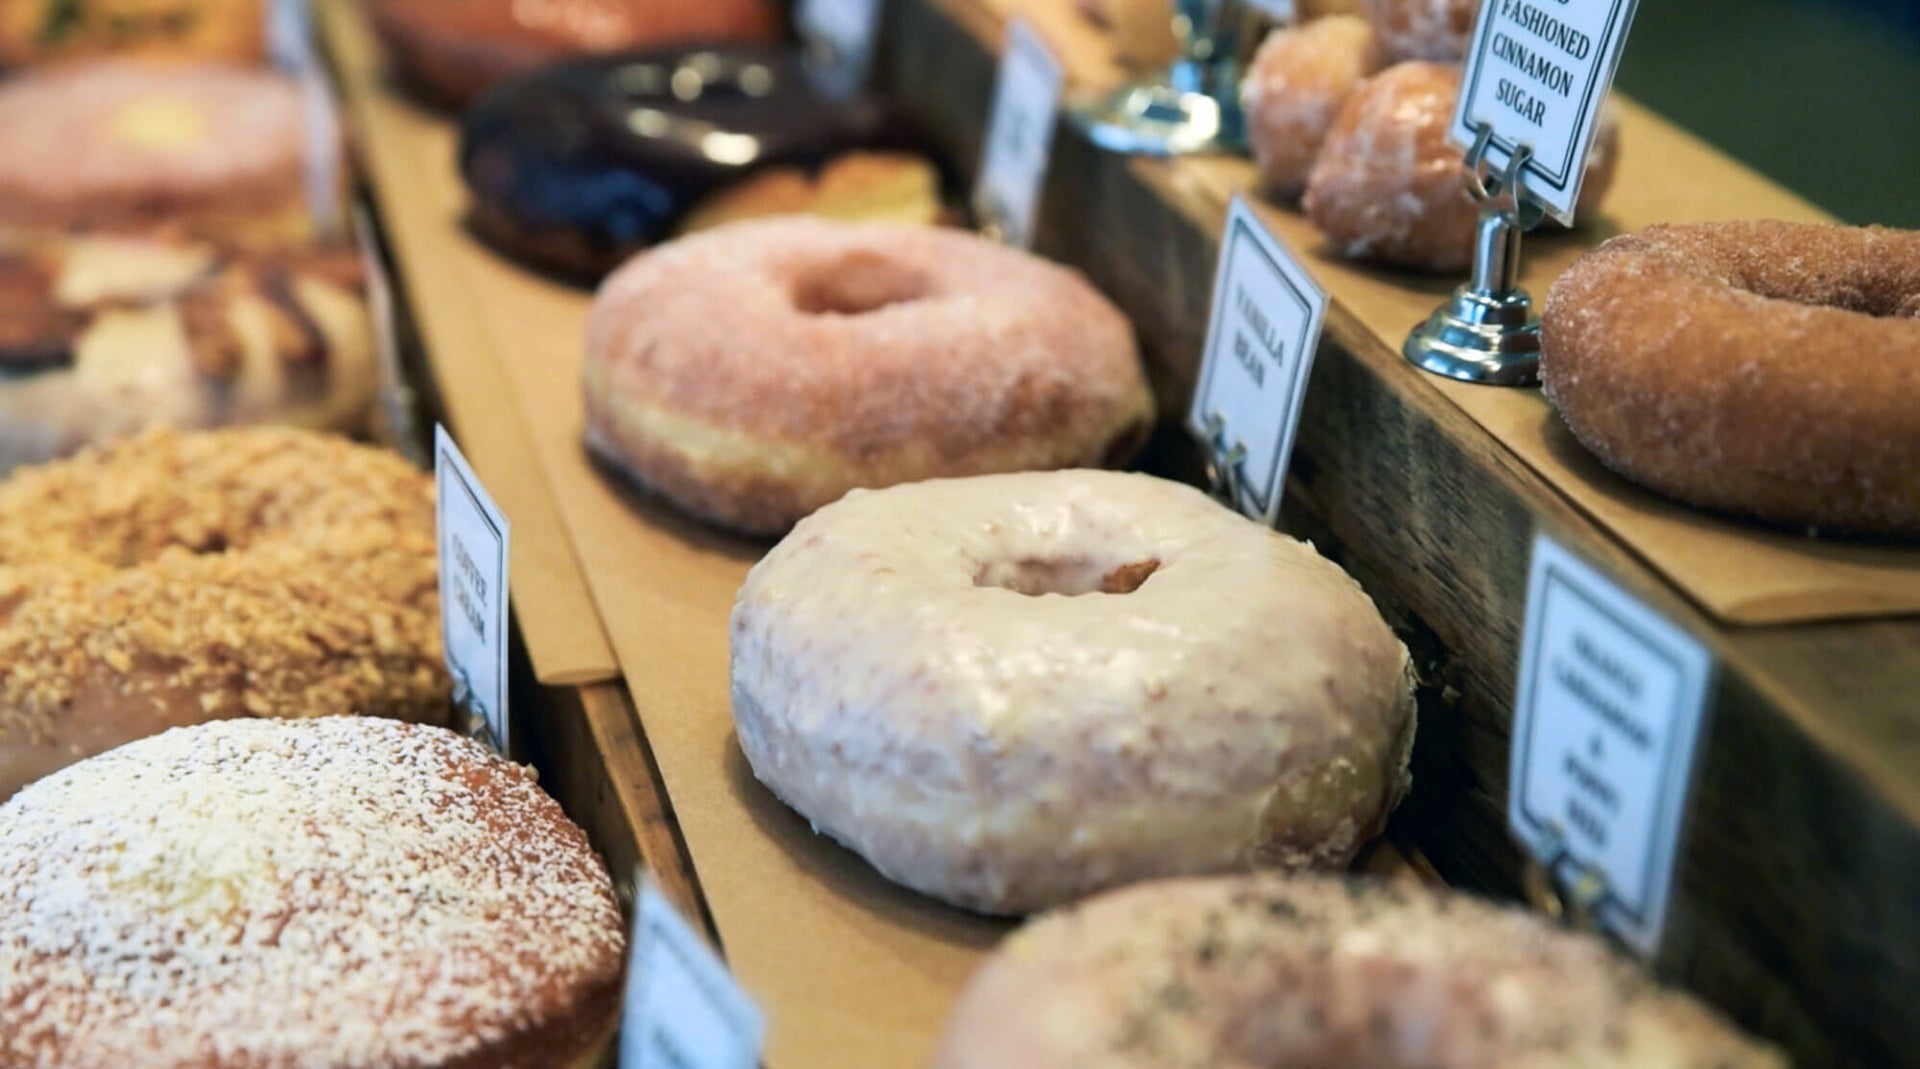 Real Food + Real People: Union Square Donuts